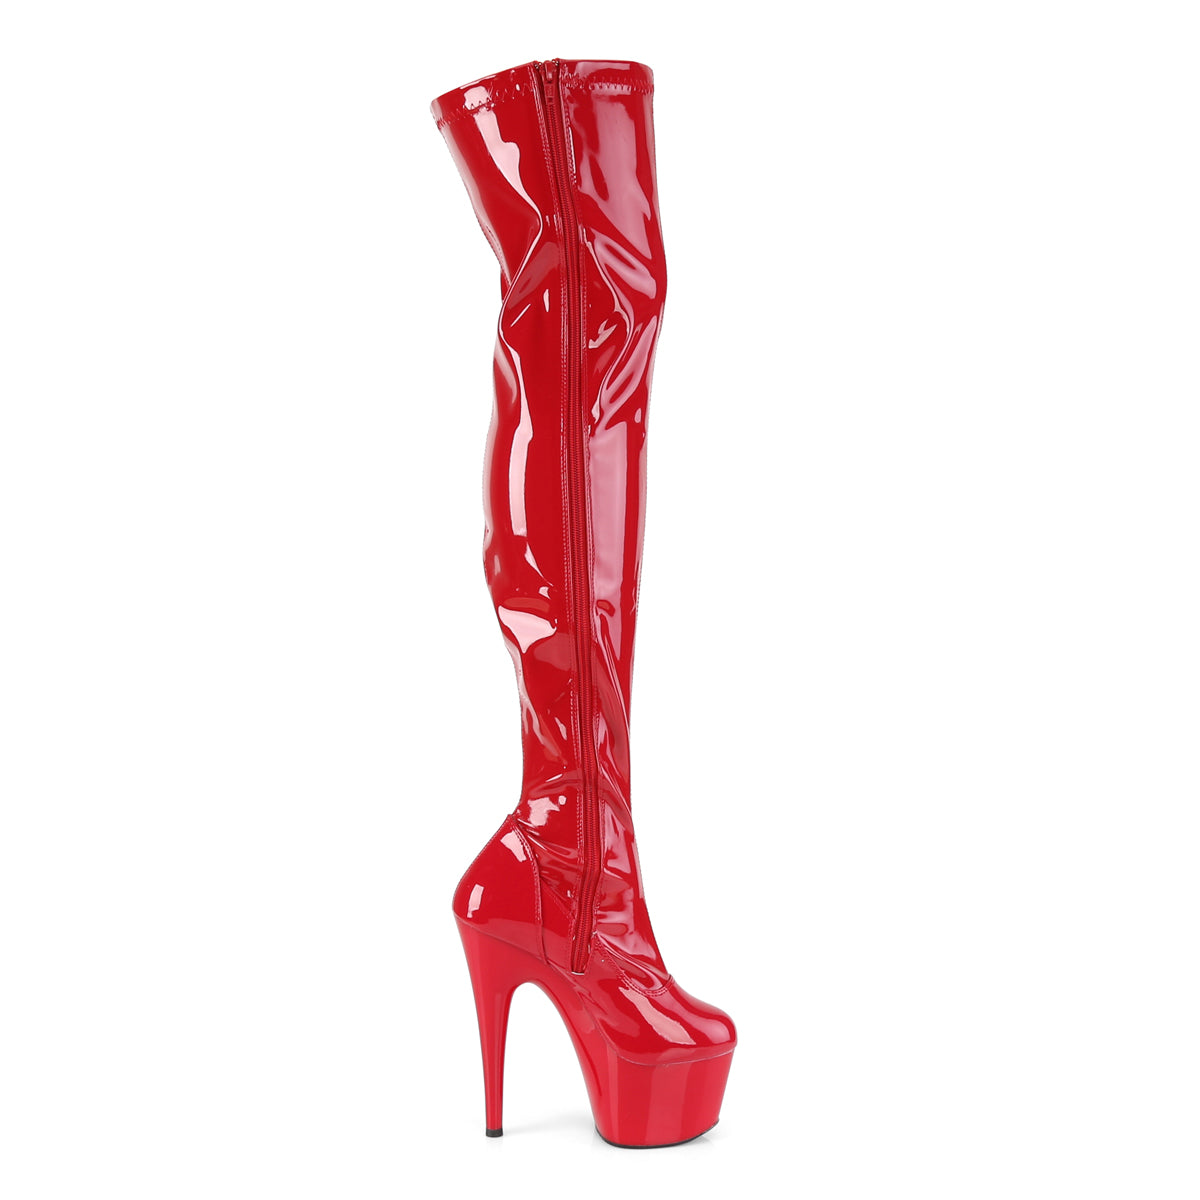 ADORE-3000 Pleaser 7 Inch Heel Red Pole Dancing Thigh Highs-Pleaser- Sexy Shoes Fetish Heels